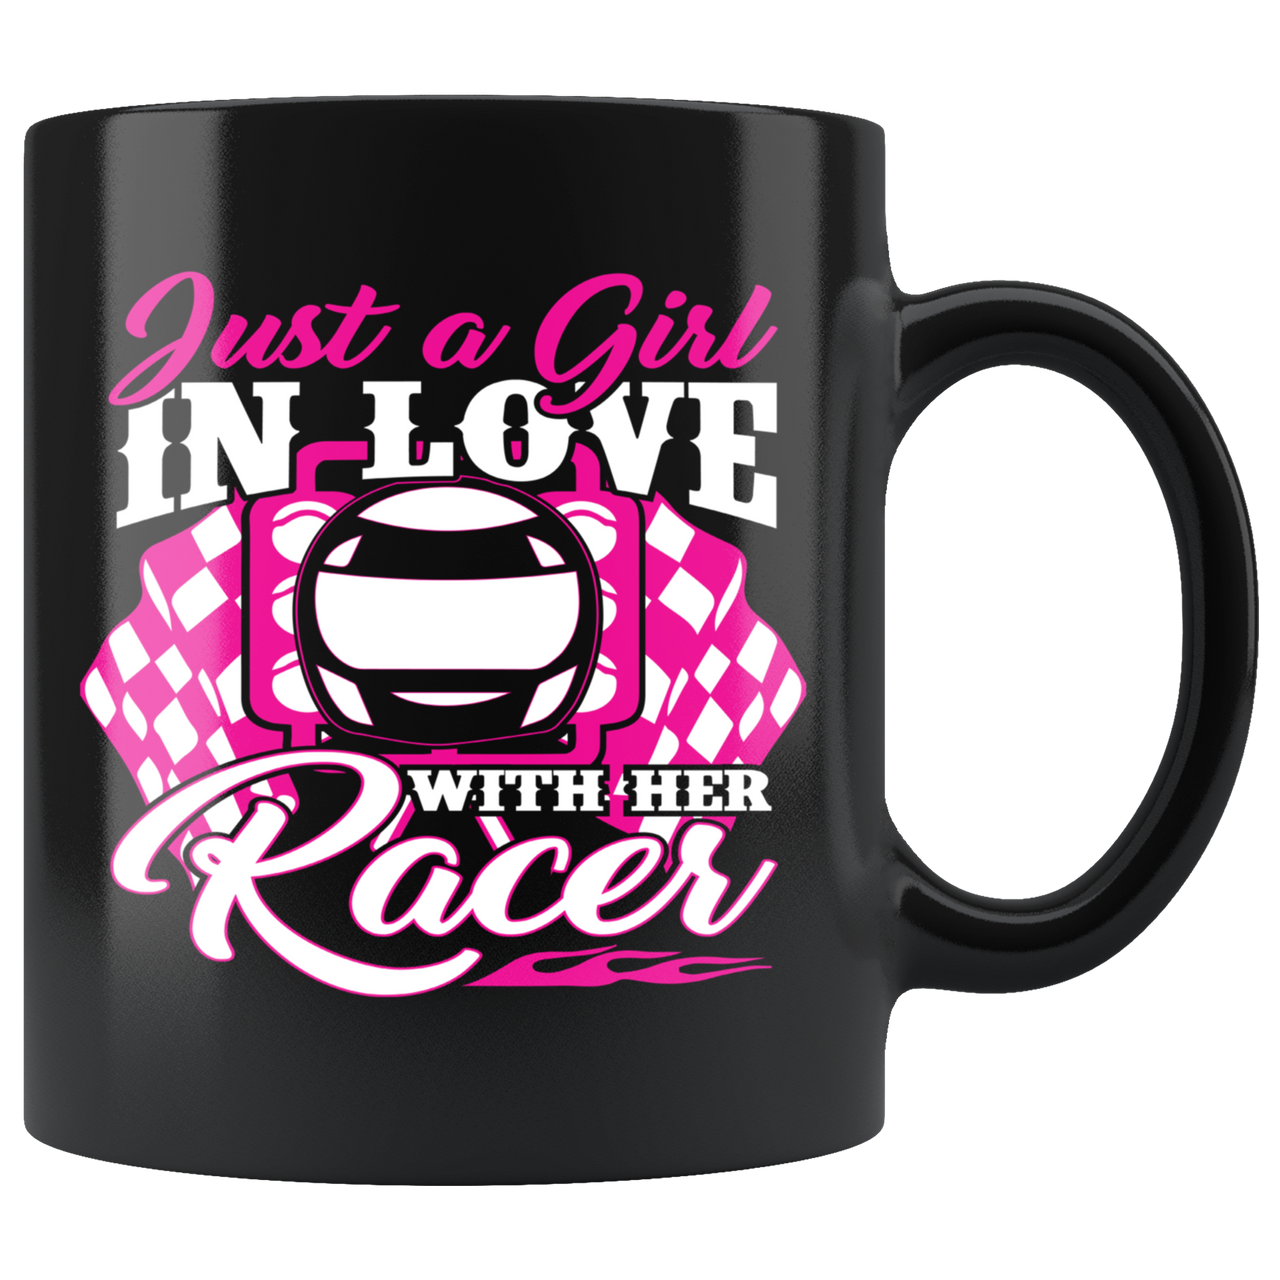 Just A Girl In Love With Her Racer Mug!